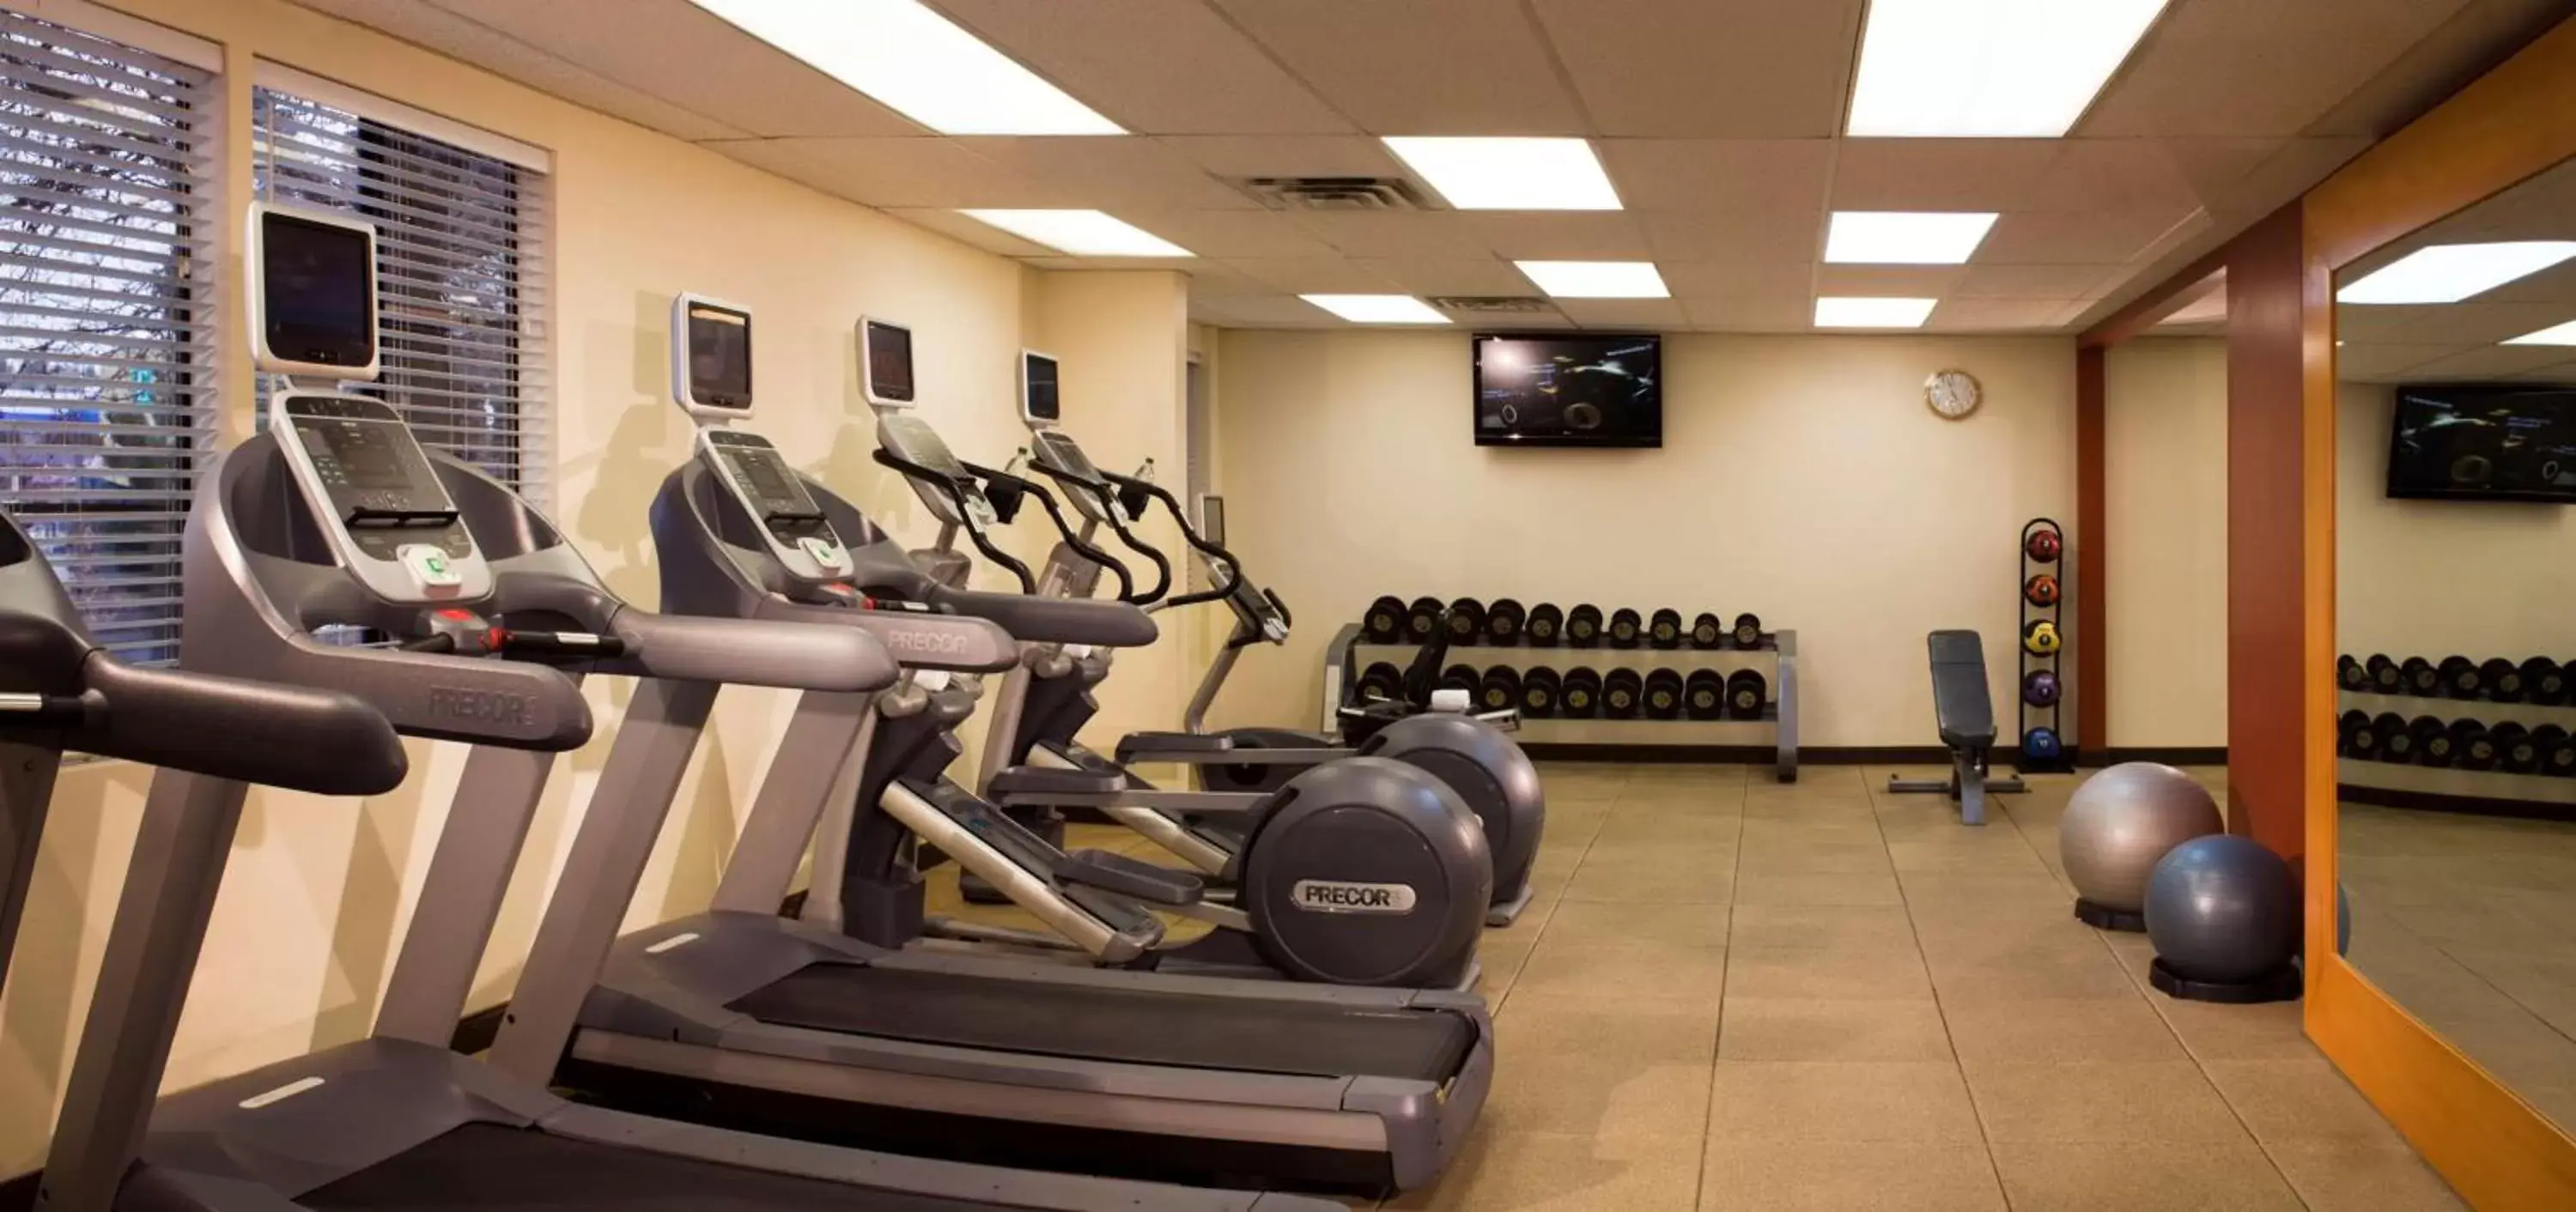 Fitness centre/facilities, Fitness Center/Facilities in Embassy Suites by Hilton Flagstaff